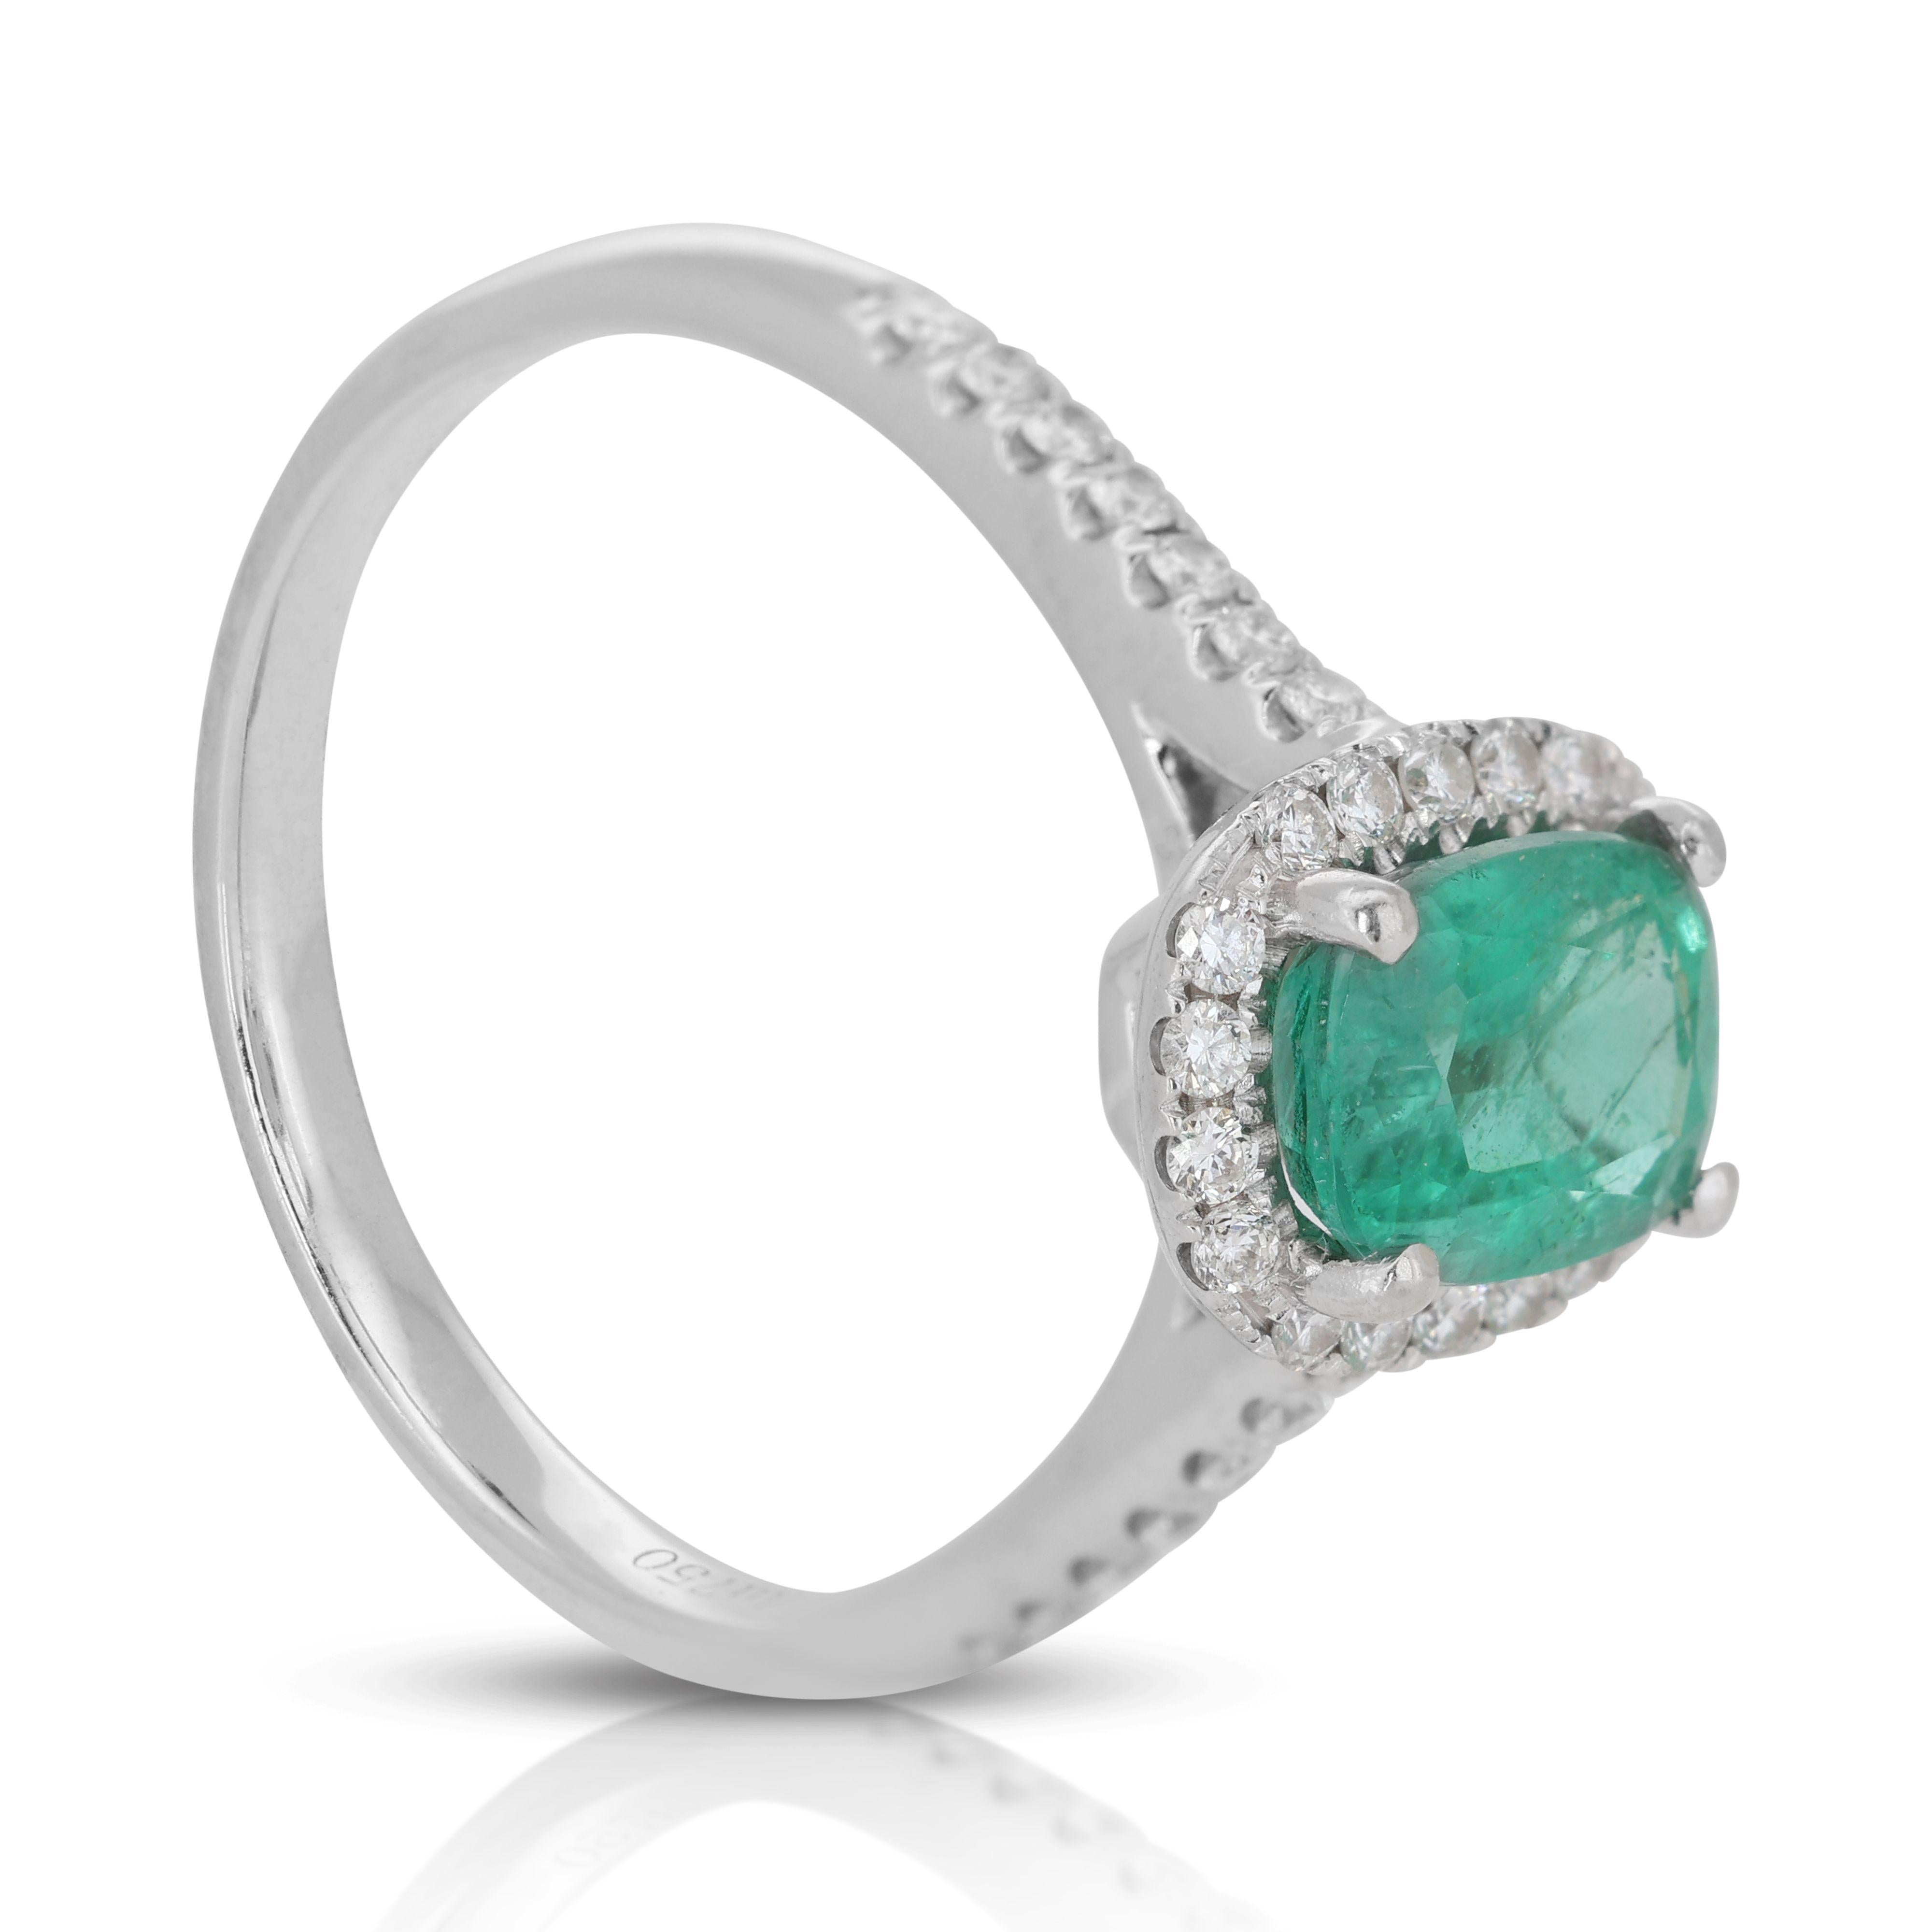 Captivating 0.69ct Emerald Ring with 0.29ct Diamond Side Stones 3